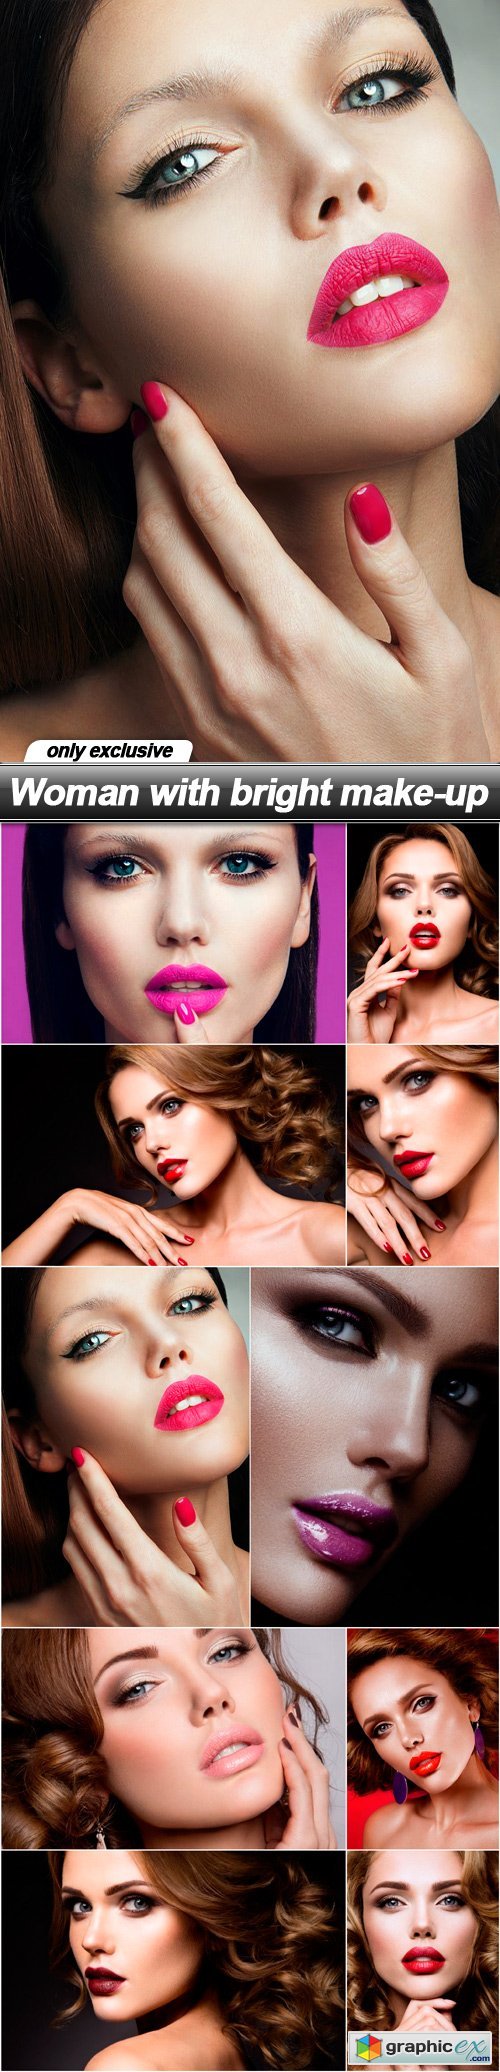 Woman with bright make-up -10 UHQ JPE